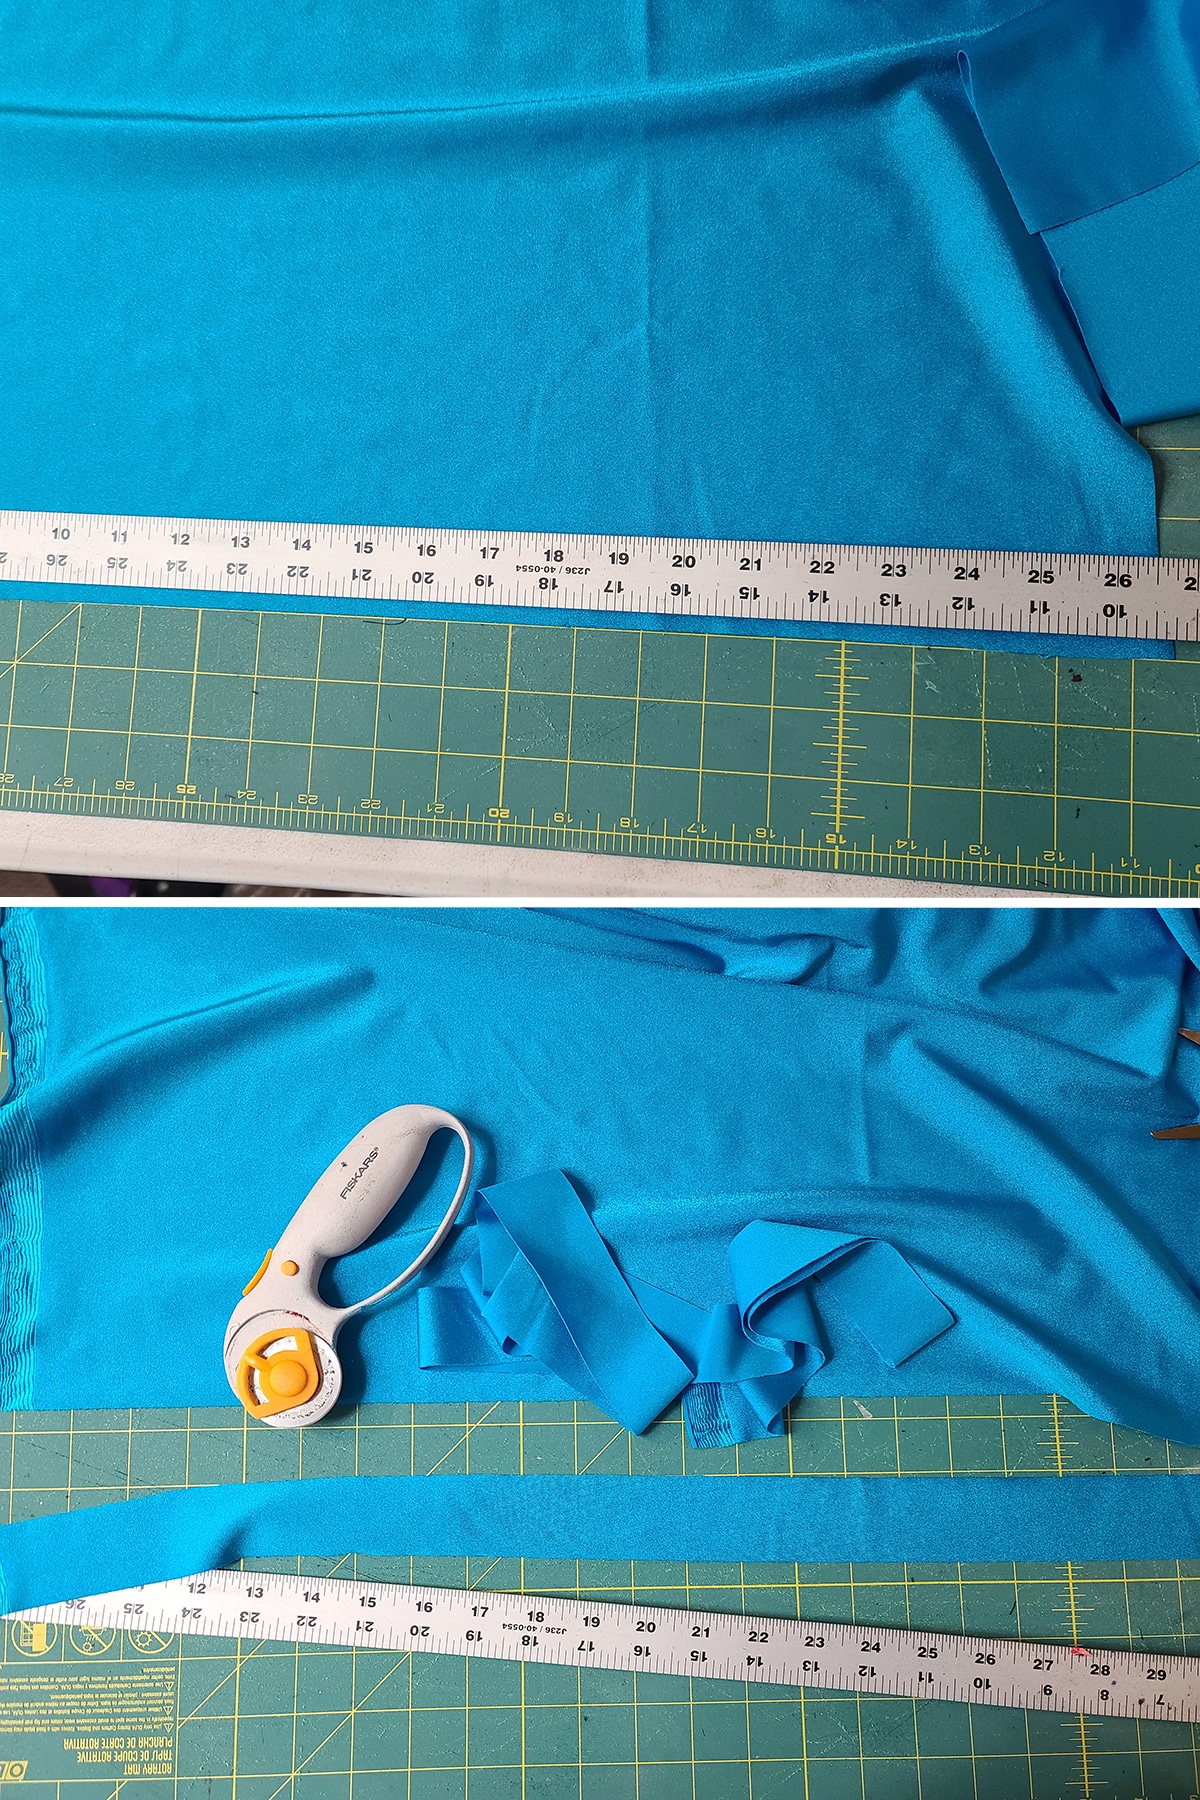 A two part image showing a ruler and rotary cutter being used to cut strips of blue spandex.